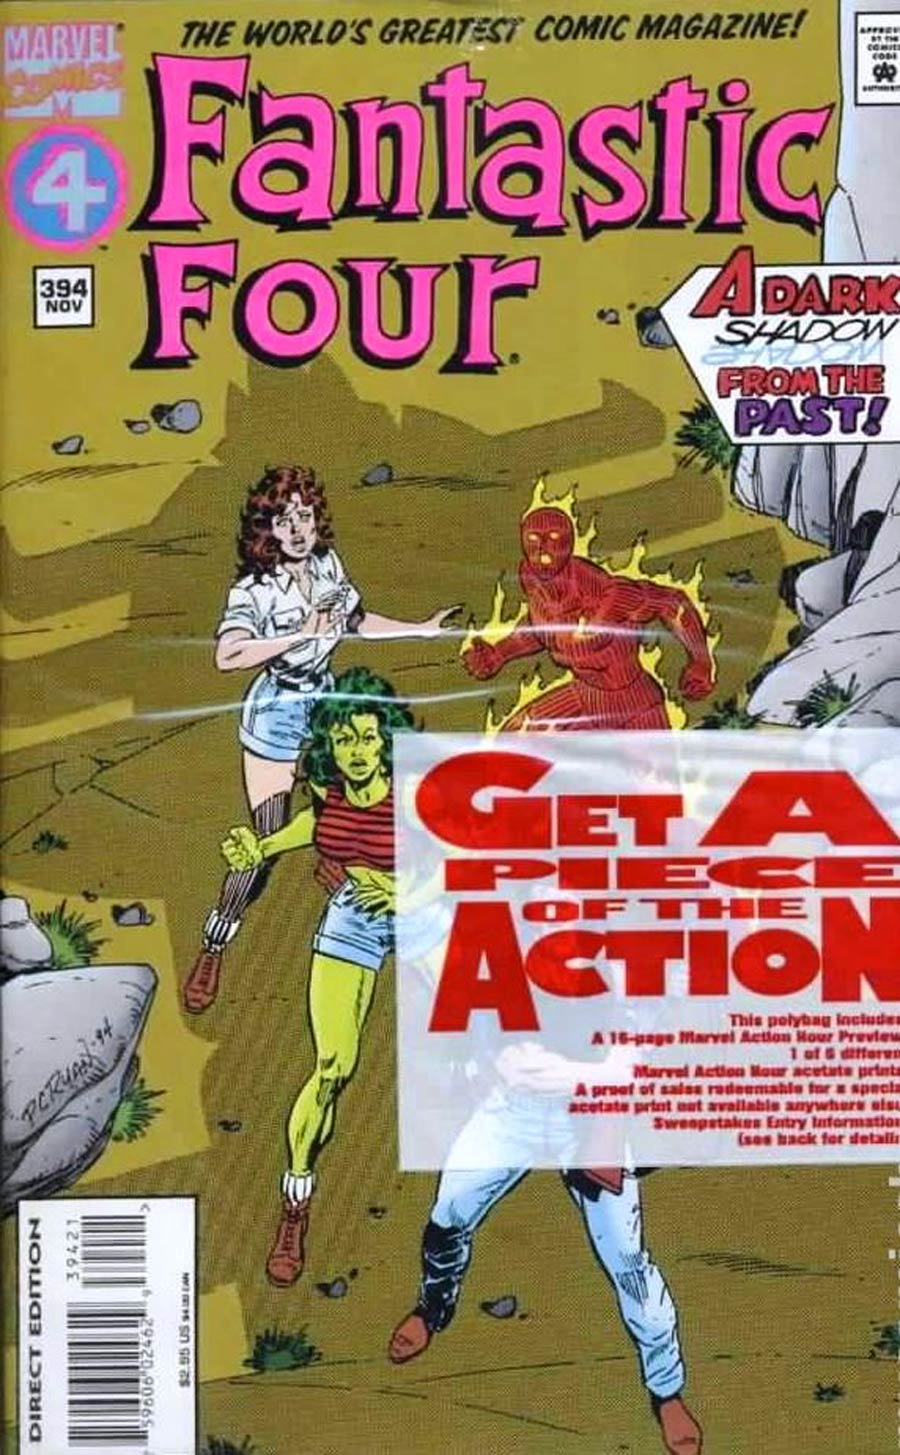 Fantastic Four #394 Cover A Collectors Edition With Polybag